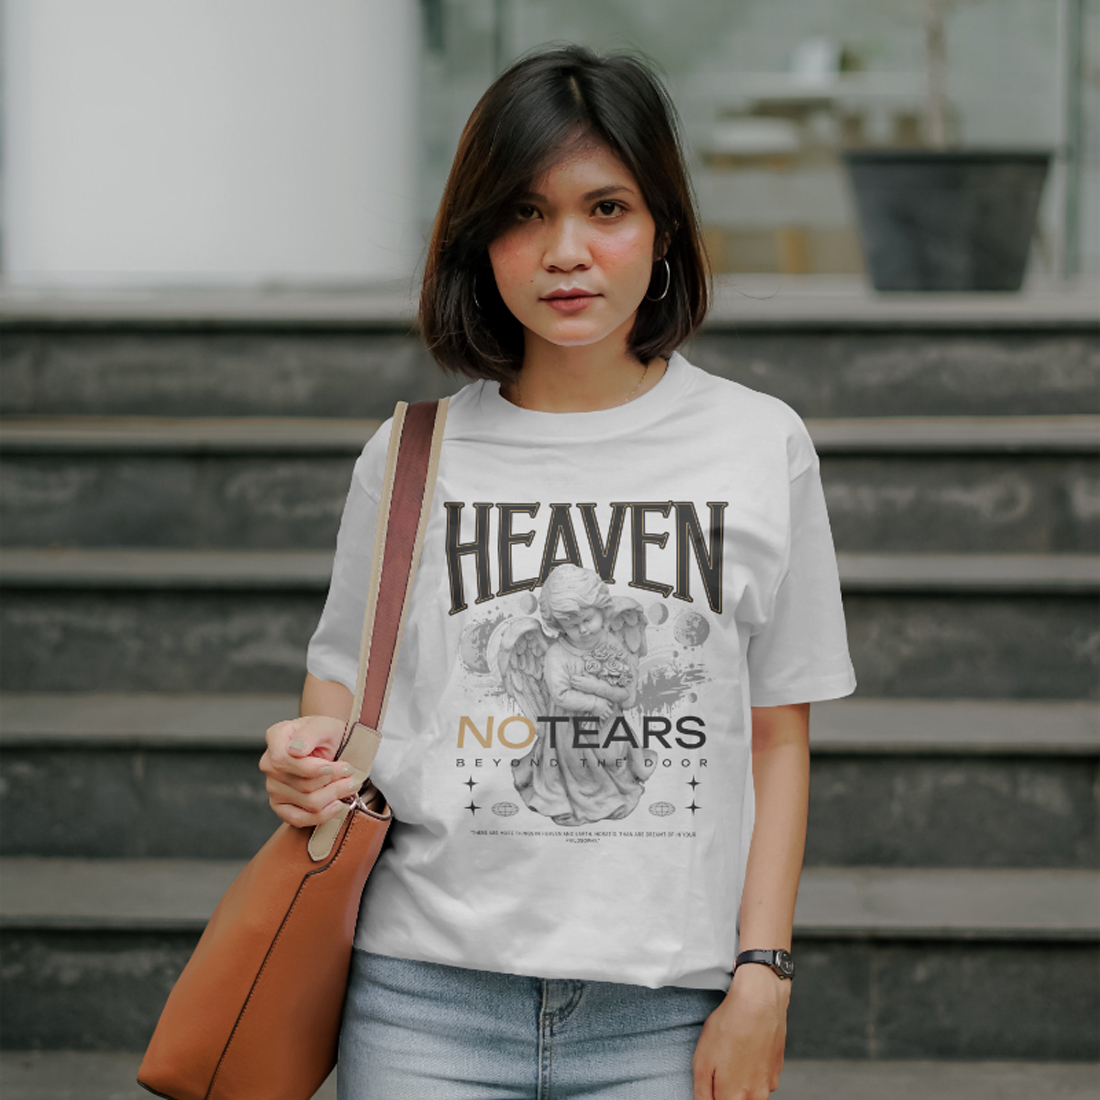 HEAVEN NOTEARS BEYOND THE DOOR – Quotes T-Shirt Design cover image.